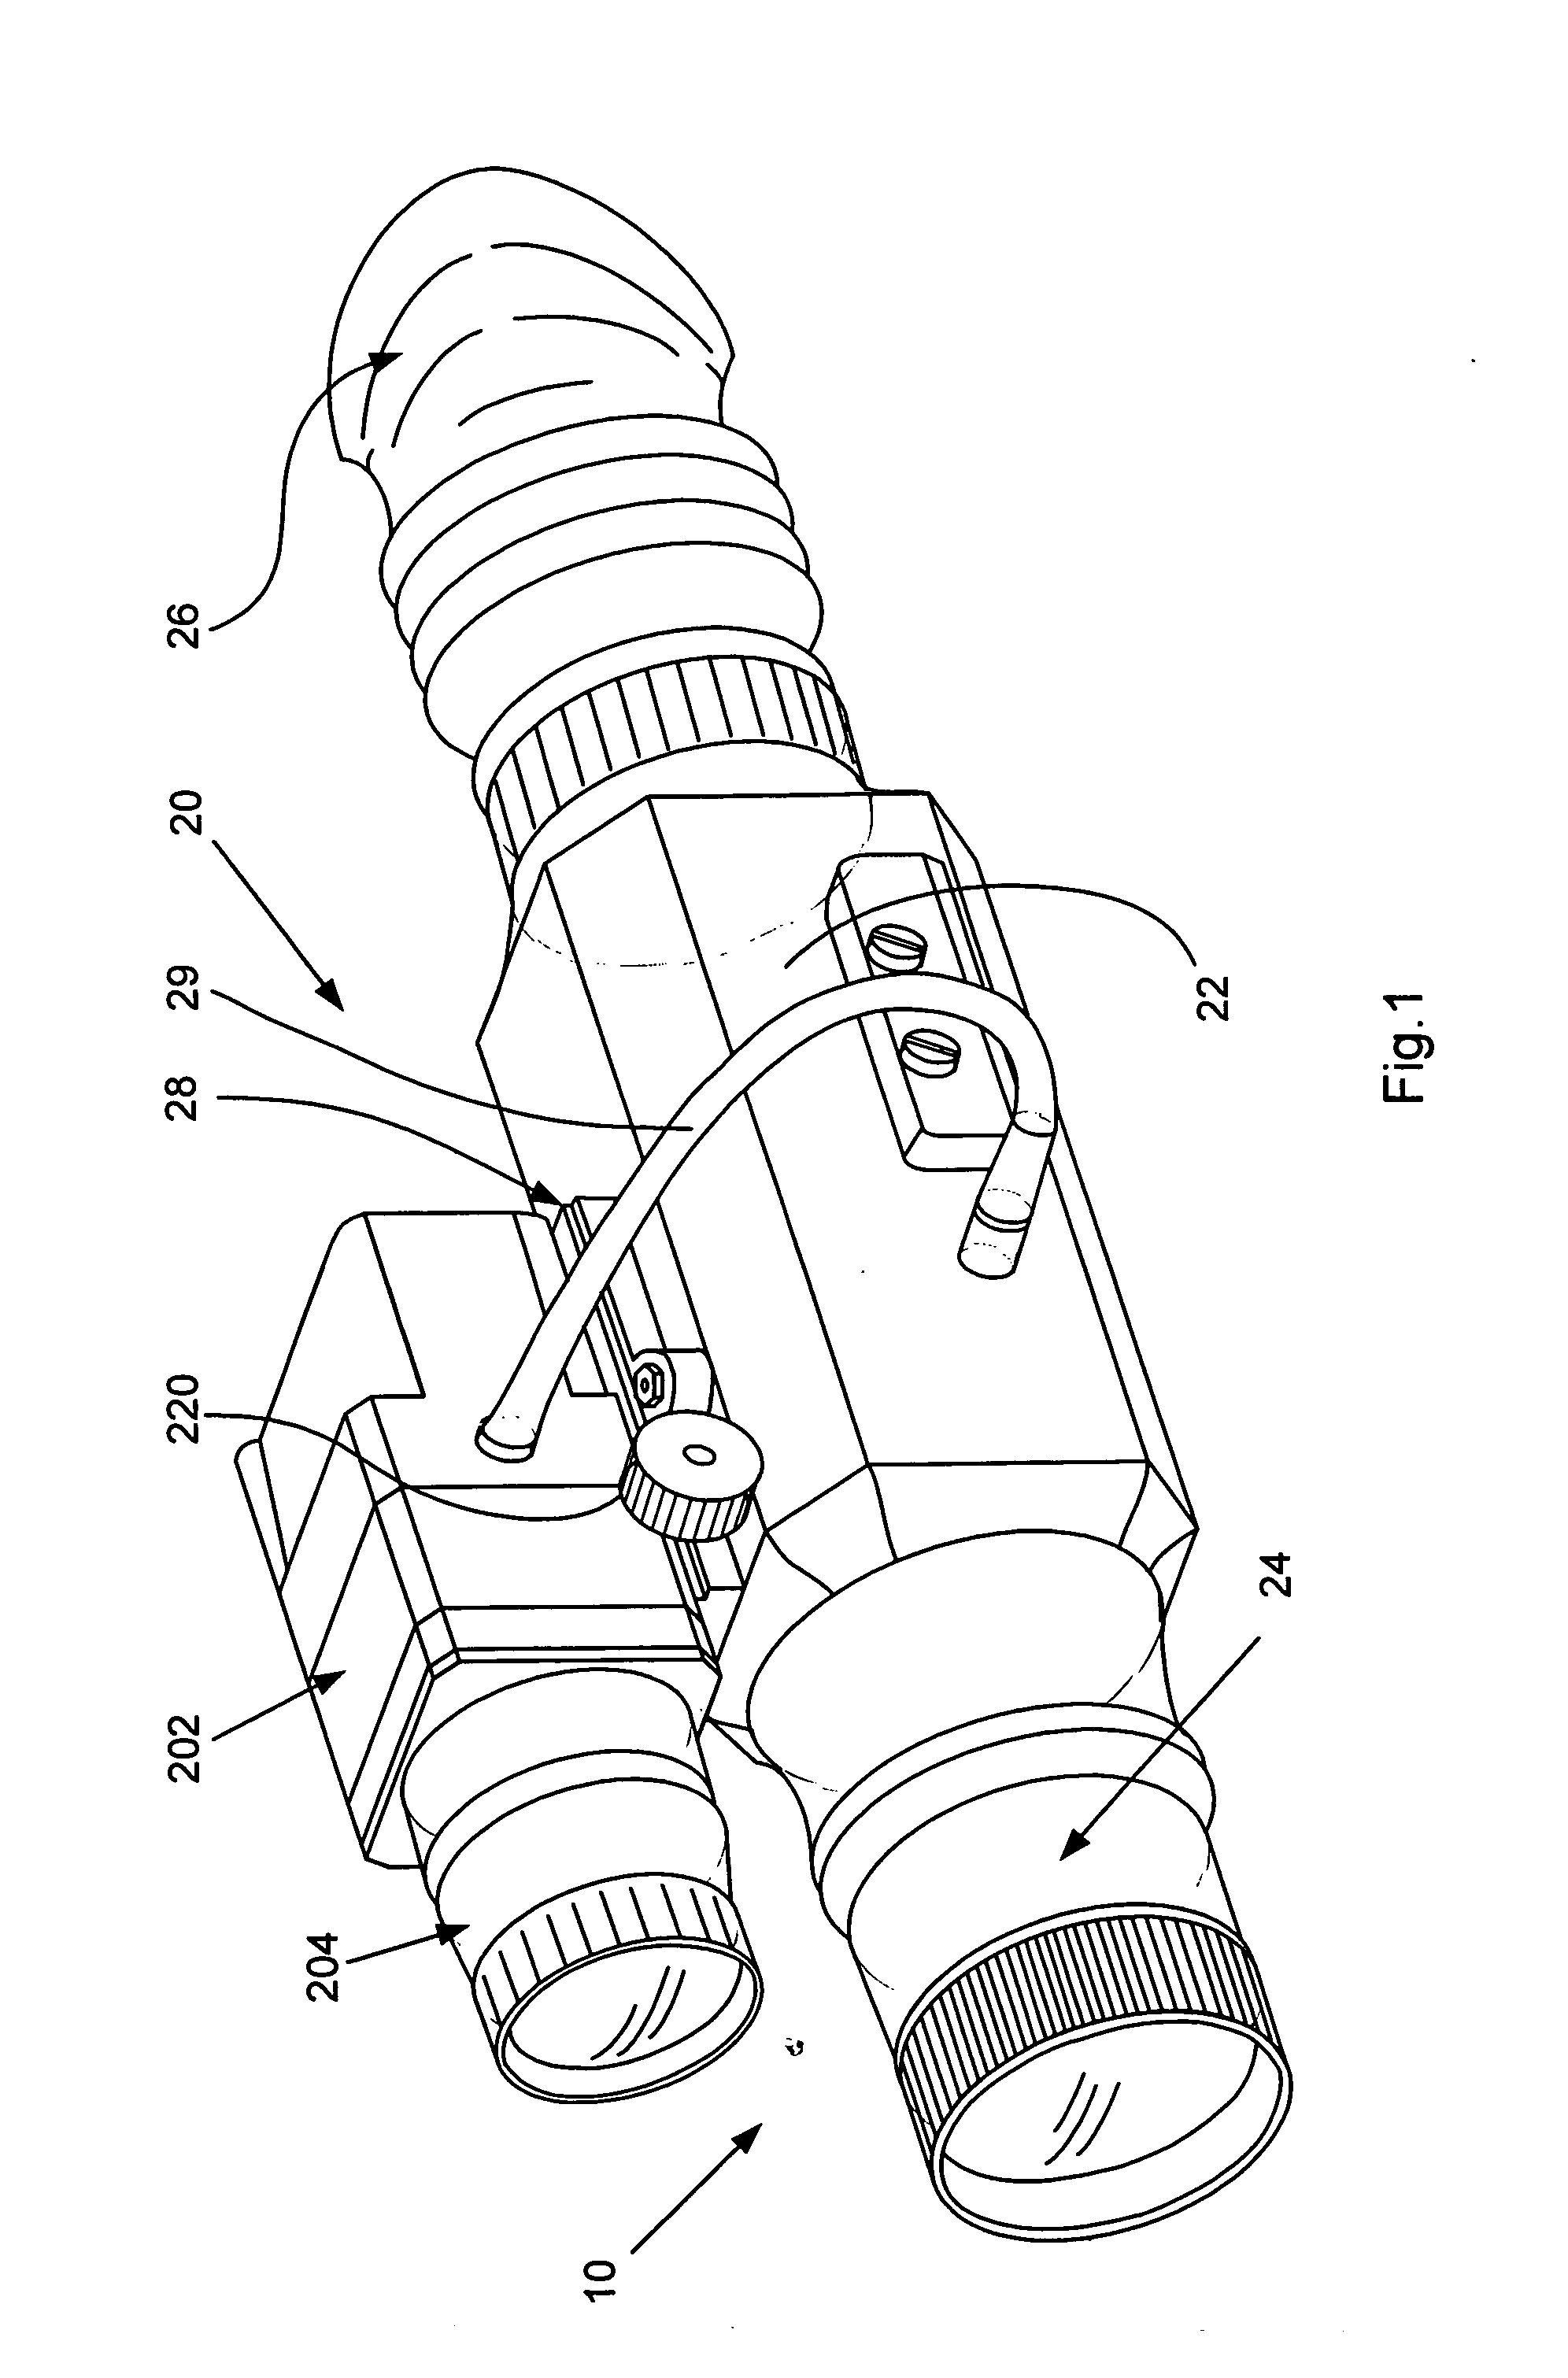 Optical system with automatic switching between operation in daylight and thermovision modes